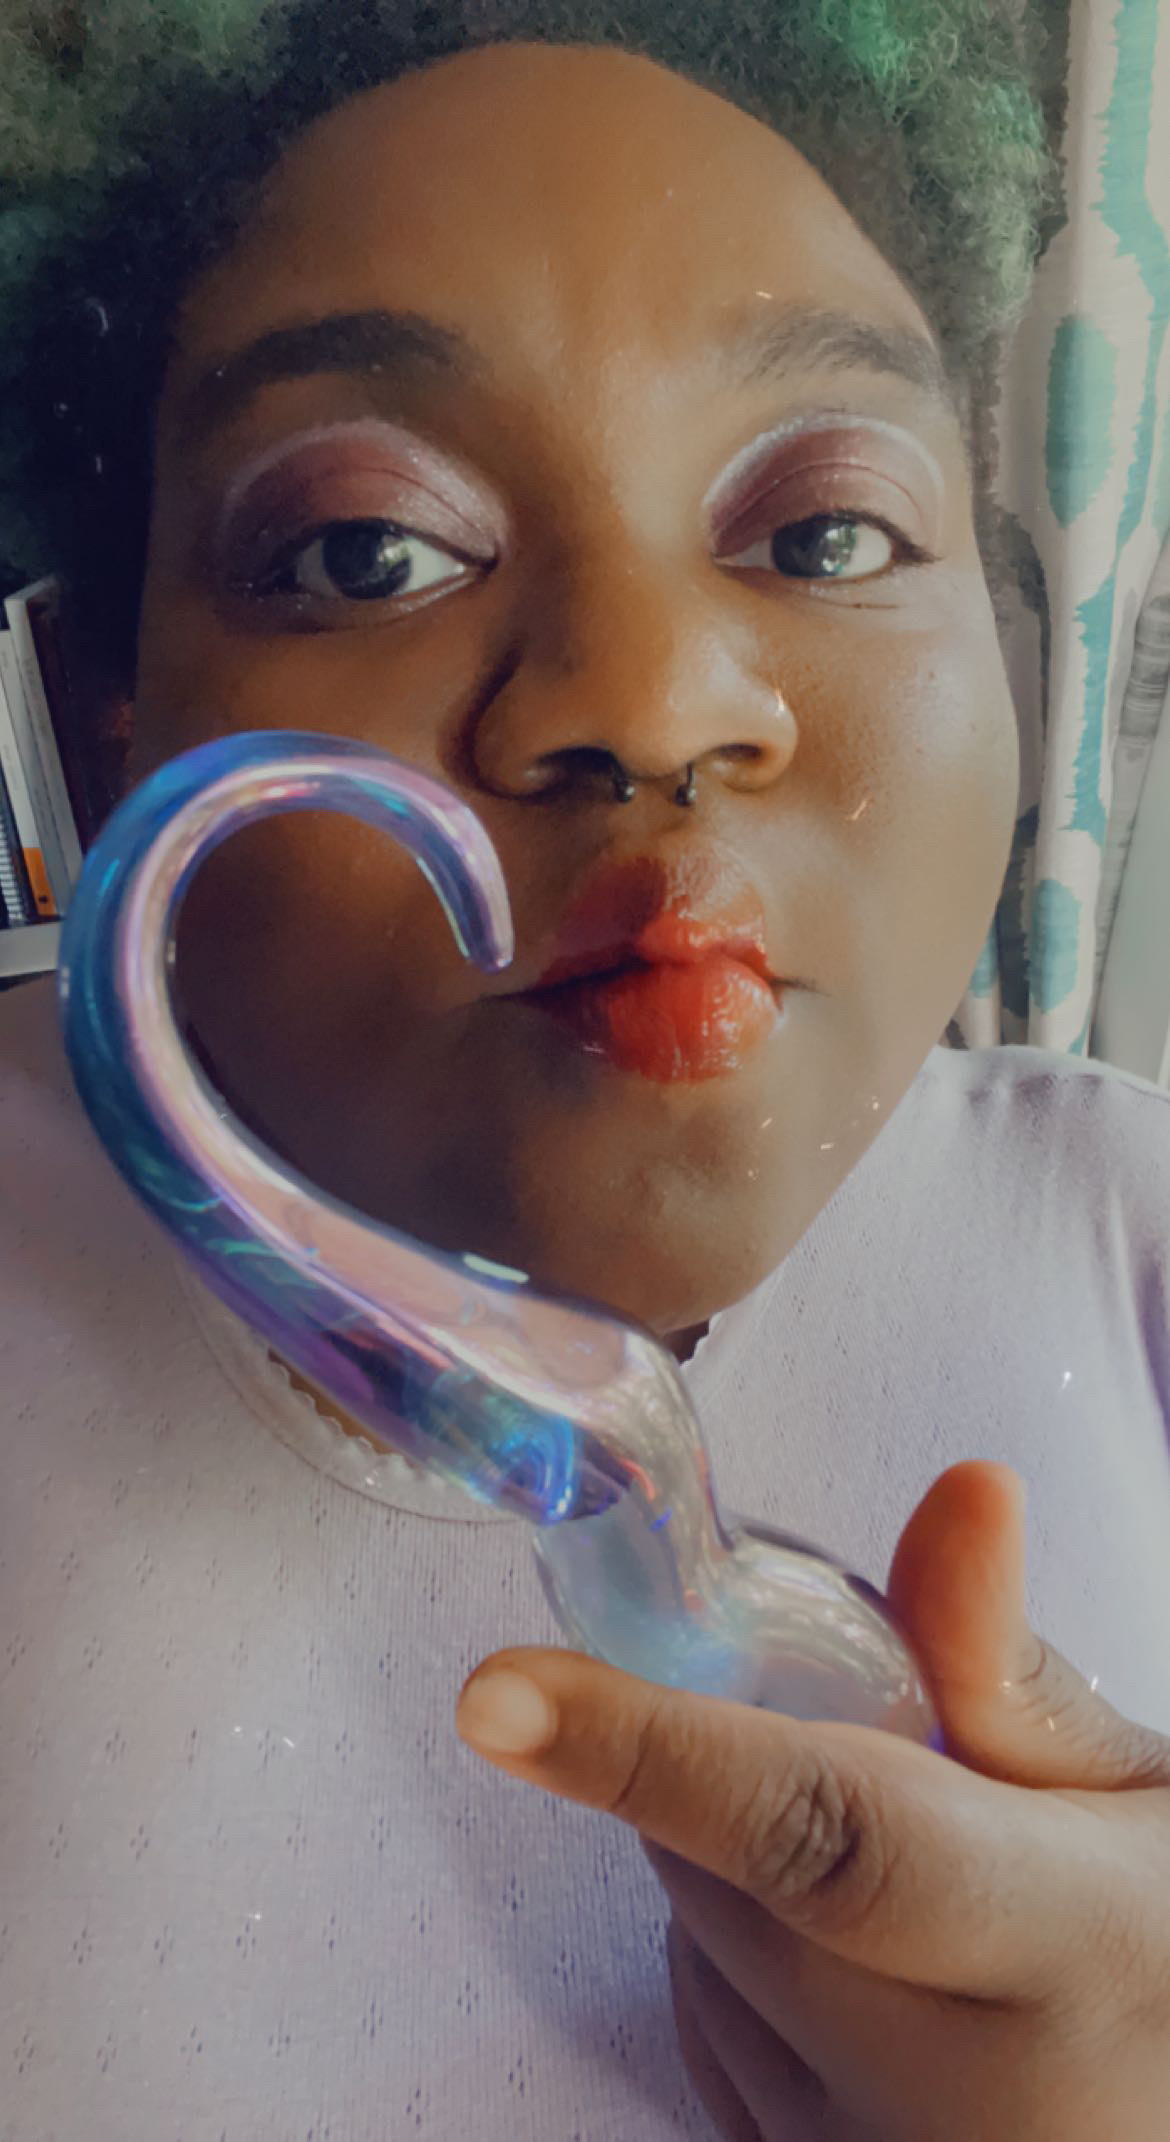 Woman pursing lips with curved handle of glass dildo near mouth